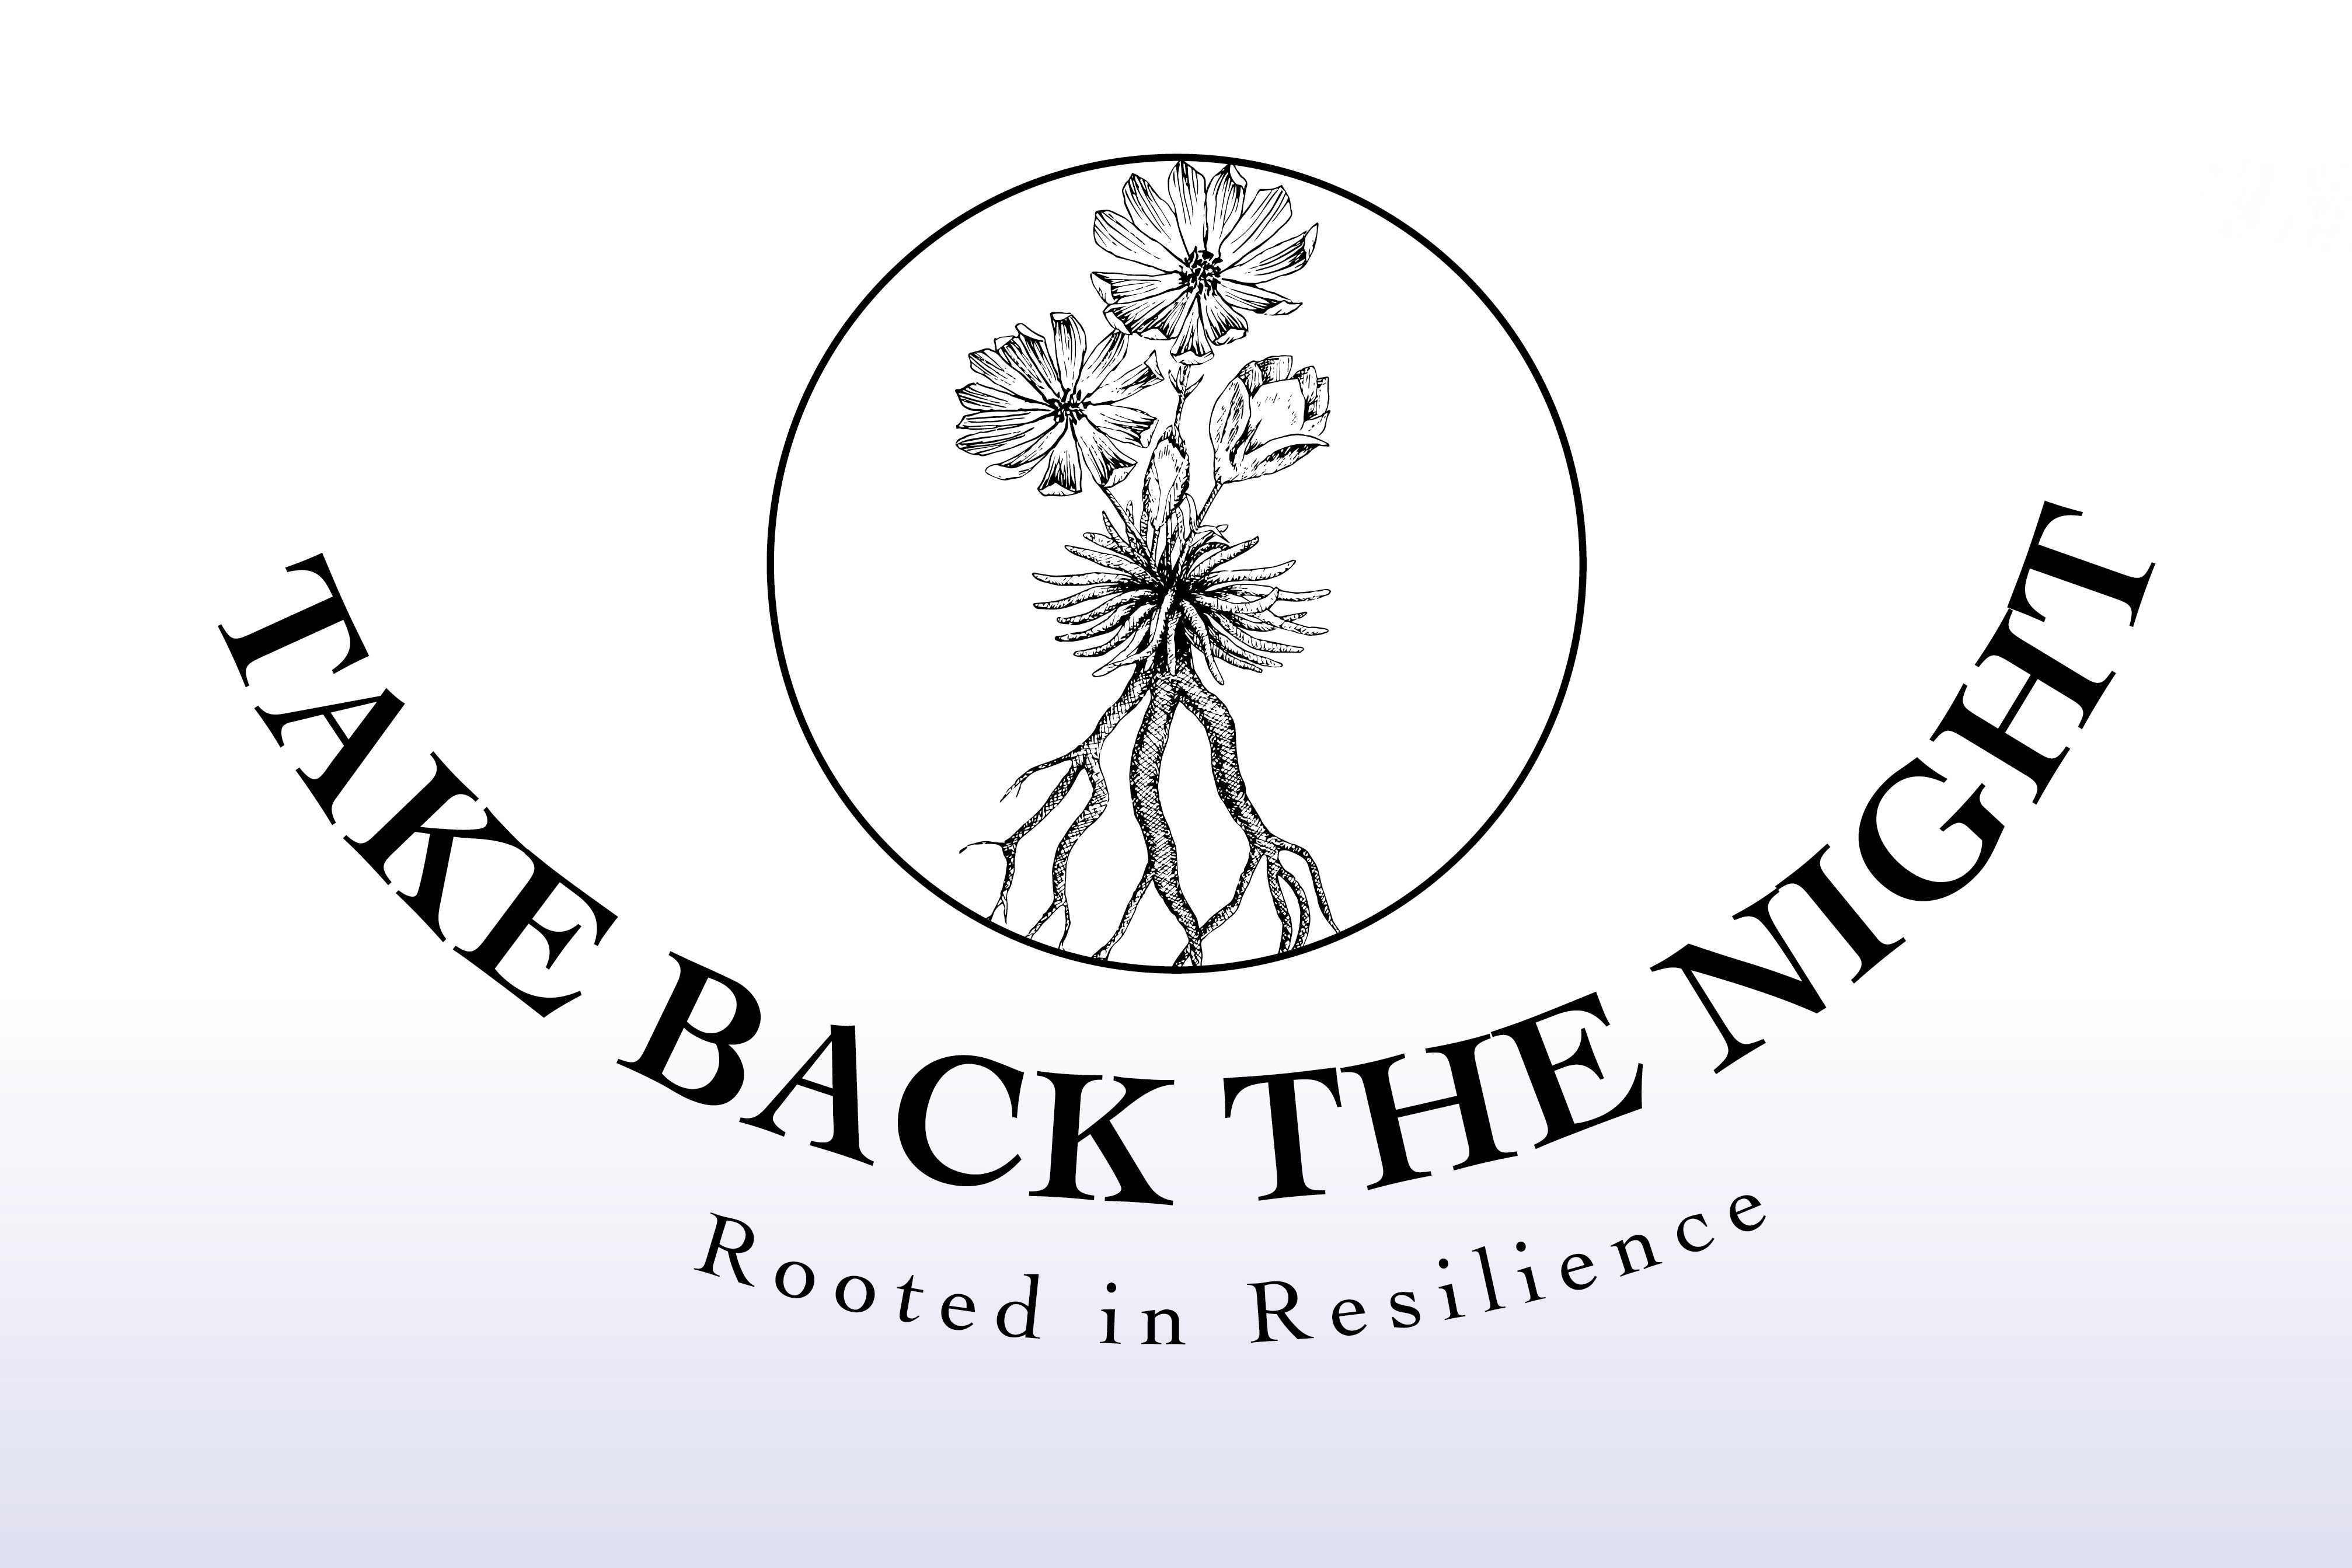 2021 Take Back the Night, Rooted in Resilience